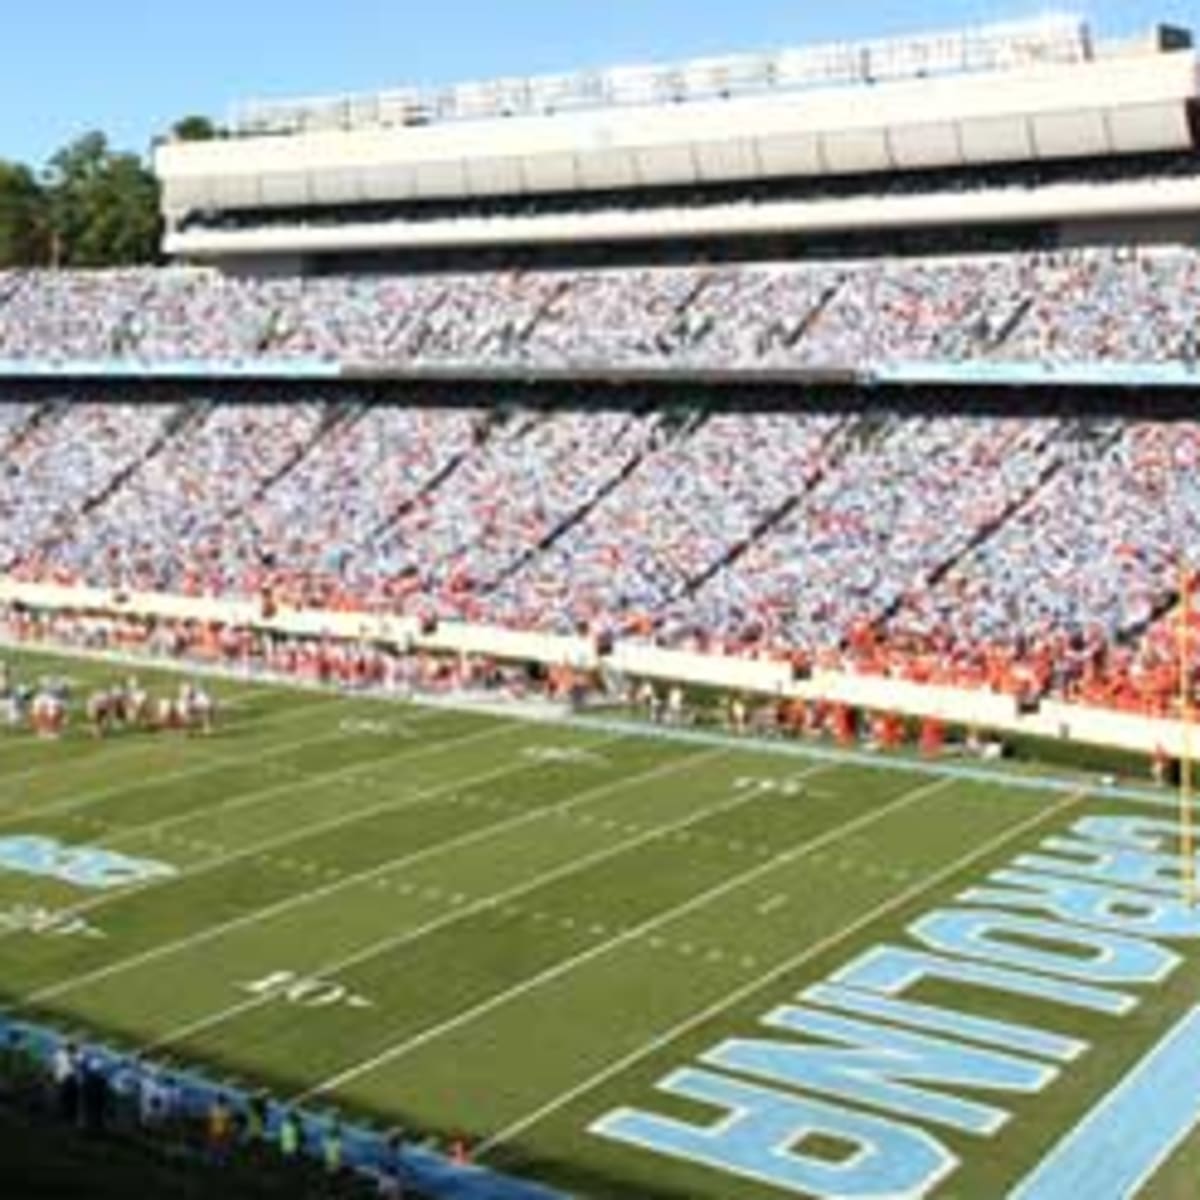 Colleges increase security at football stadiums, basketball arenas